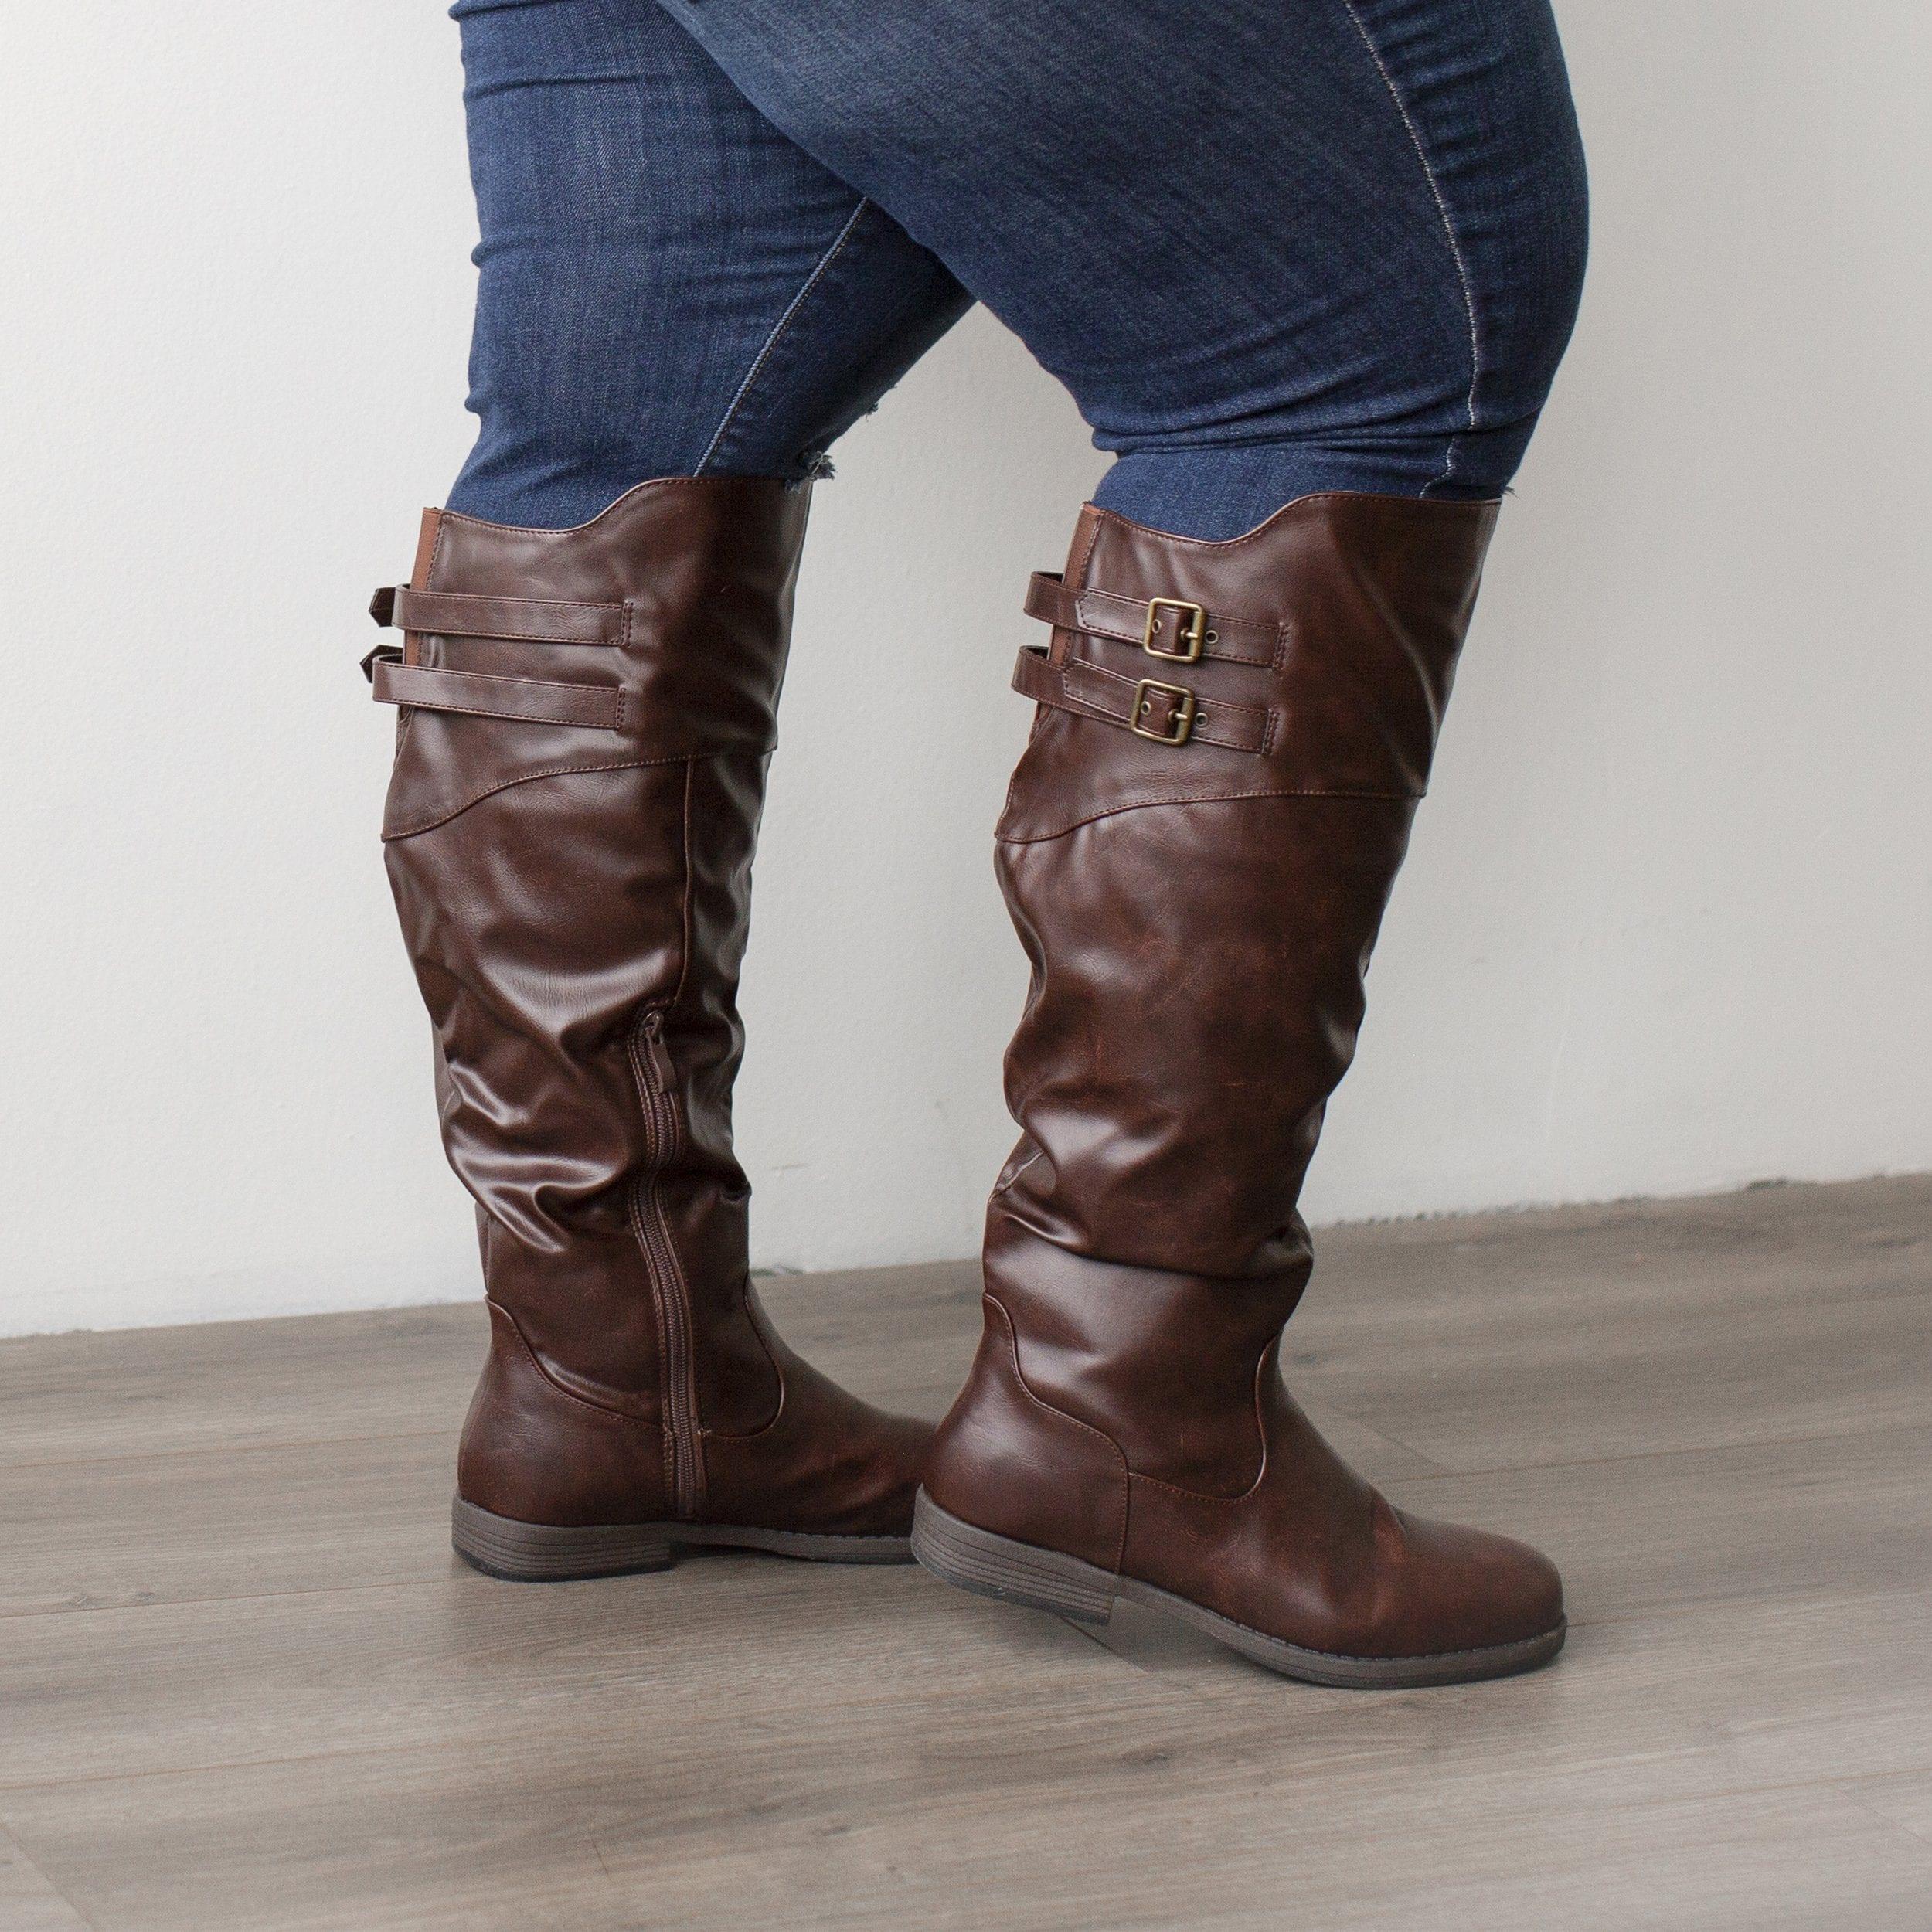 Tori Extra Wide Calf Boot | Women's Faux Leather Boots | Journee Collection